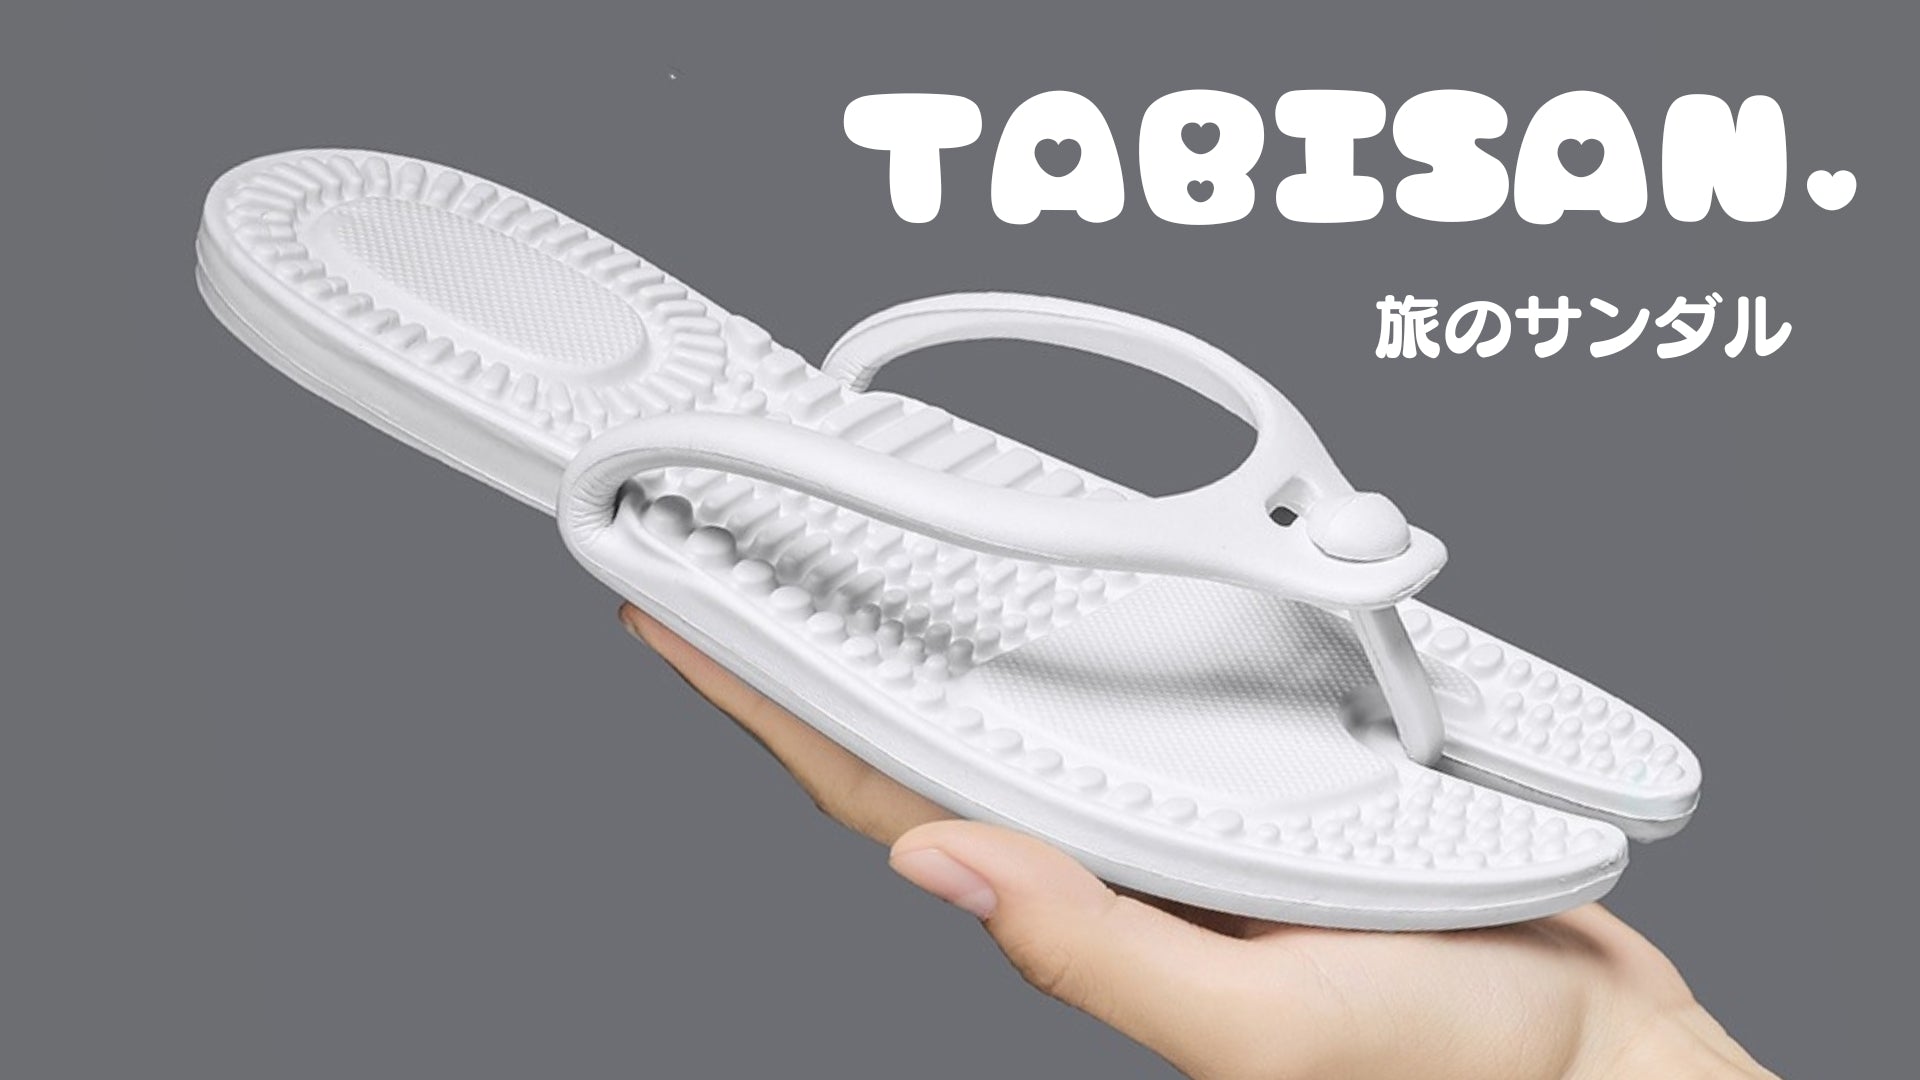 TABISAN: Your new travel companion! foldable sandals